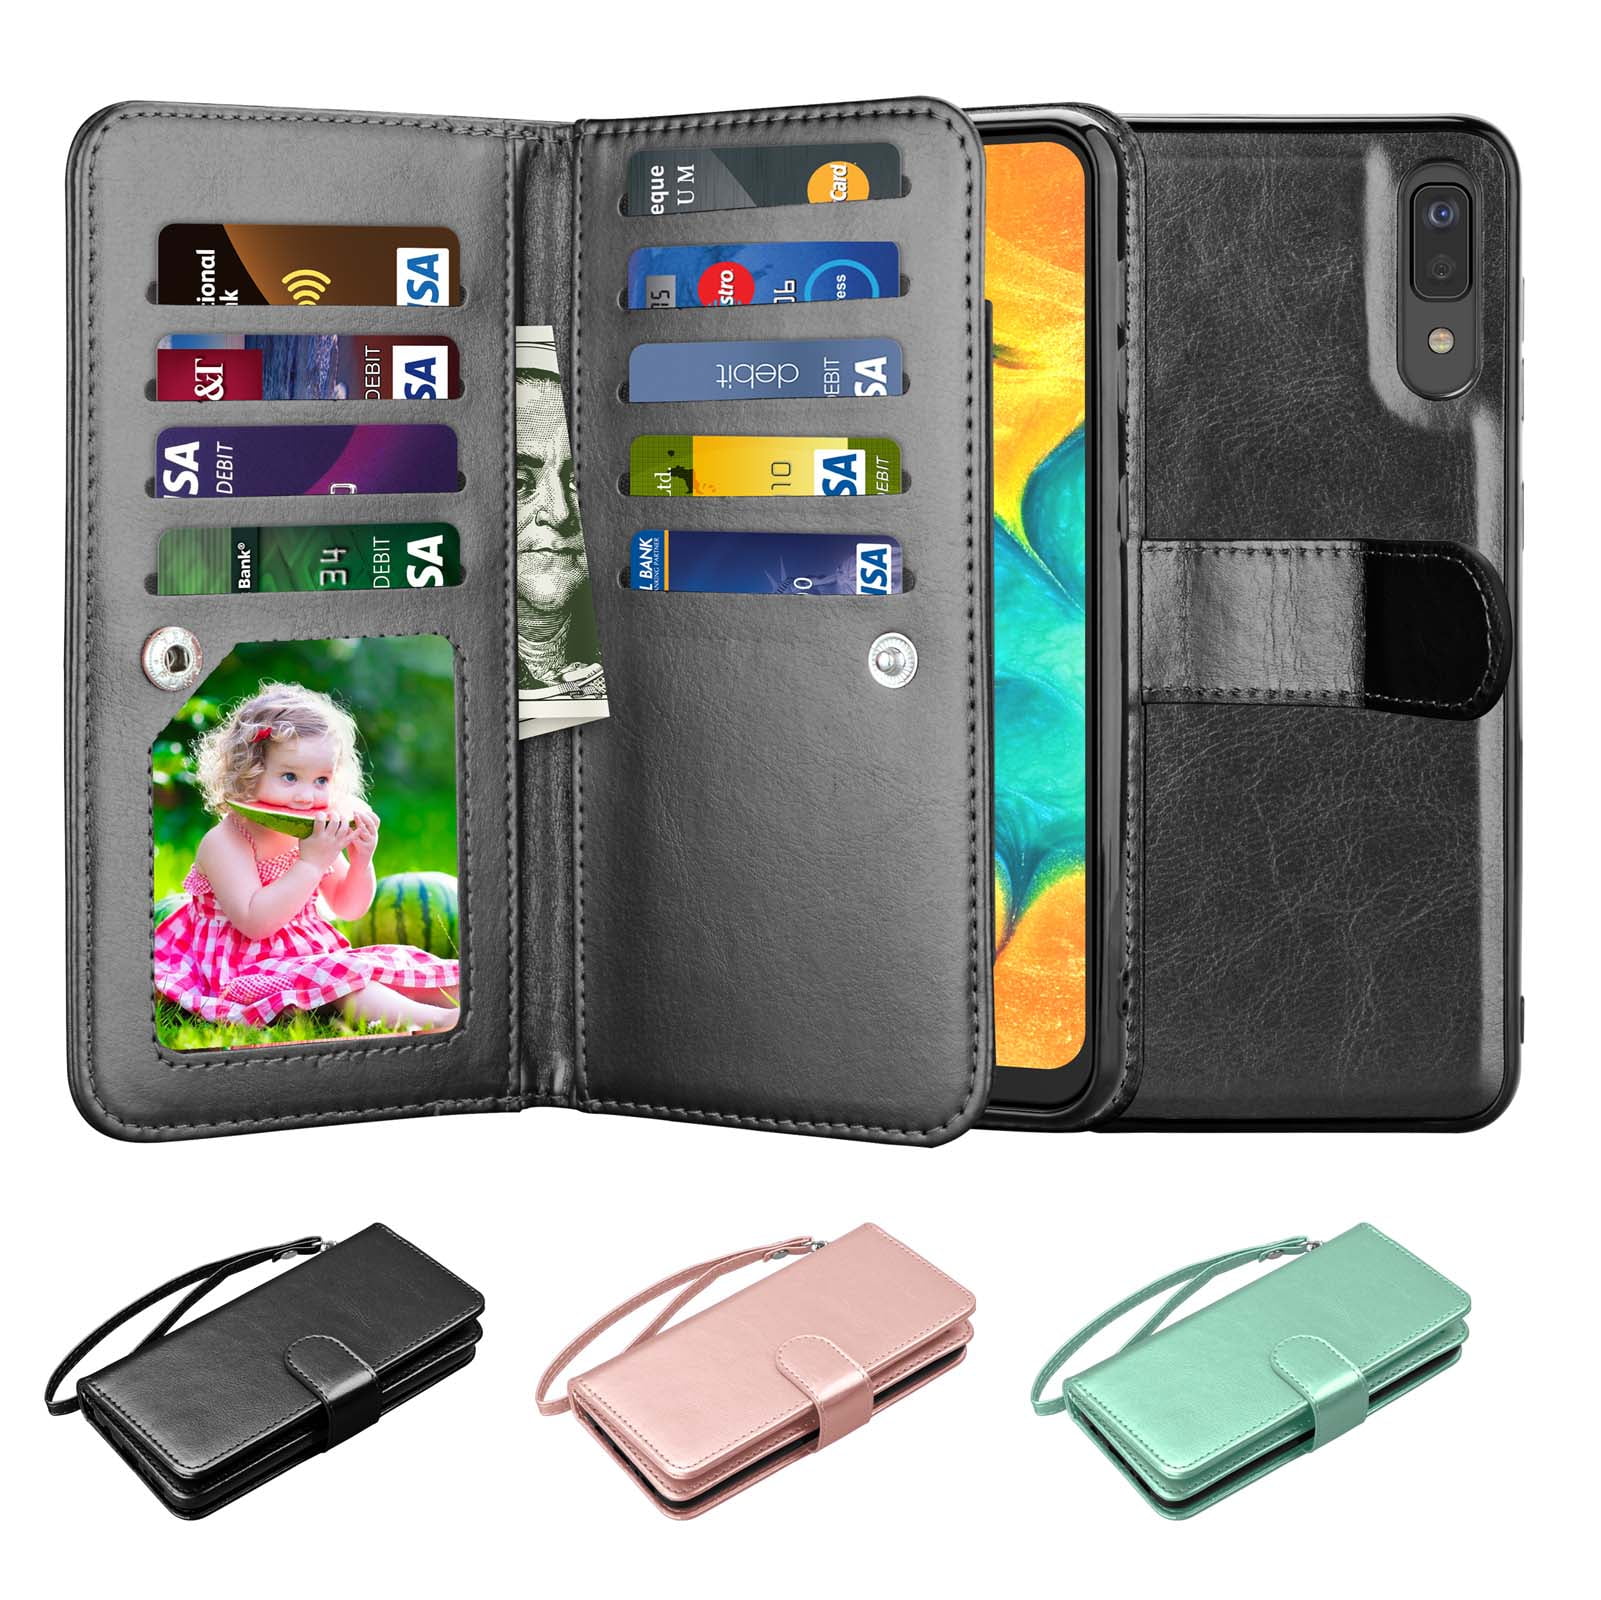 Folio Flip Protective Cover Huawei P Smart 2019 Wallet Case with Wrist Strap Magnetic Closure Foldable Stand Green Card Slot Leather Case for Huawei P Smart 2019 Embossed Cat Pattern